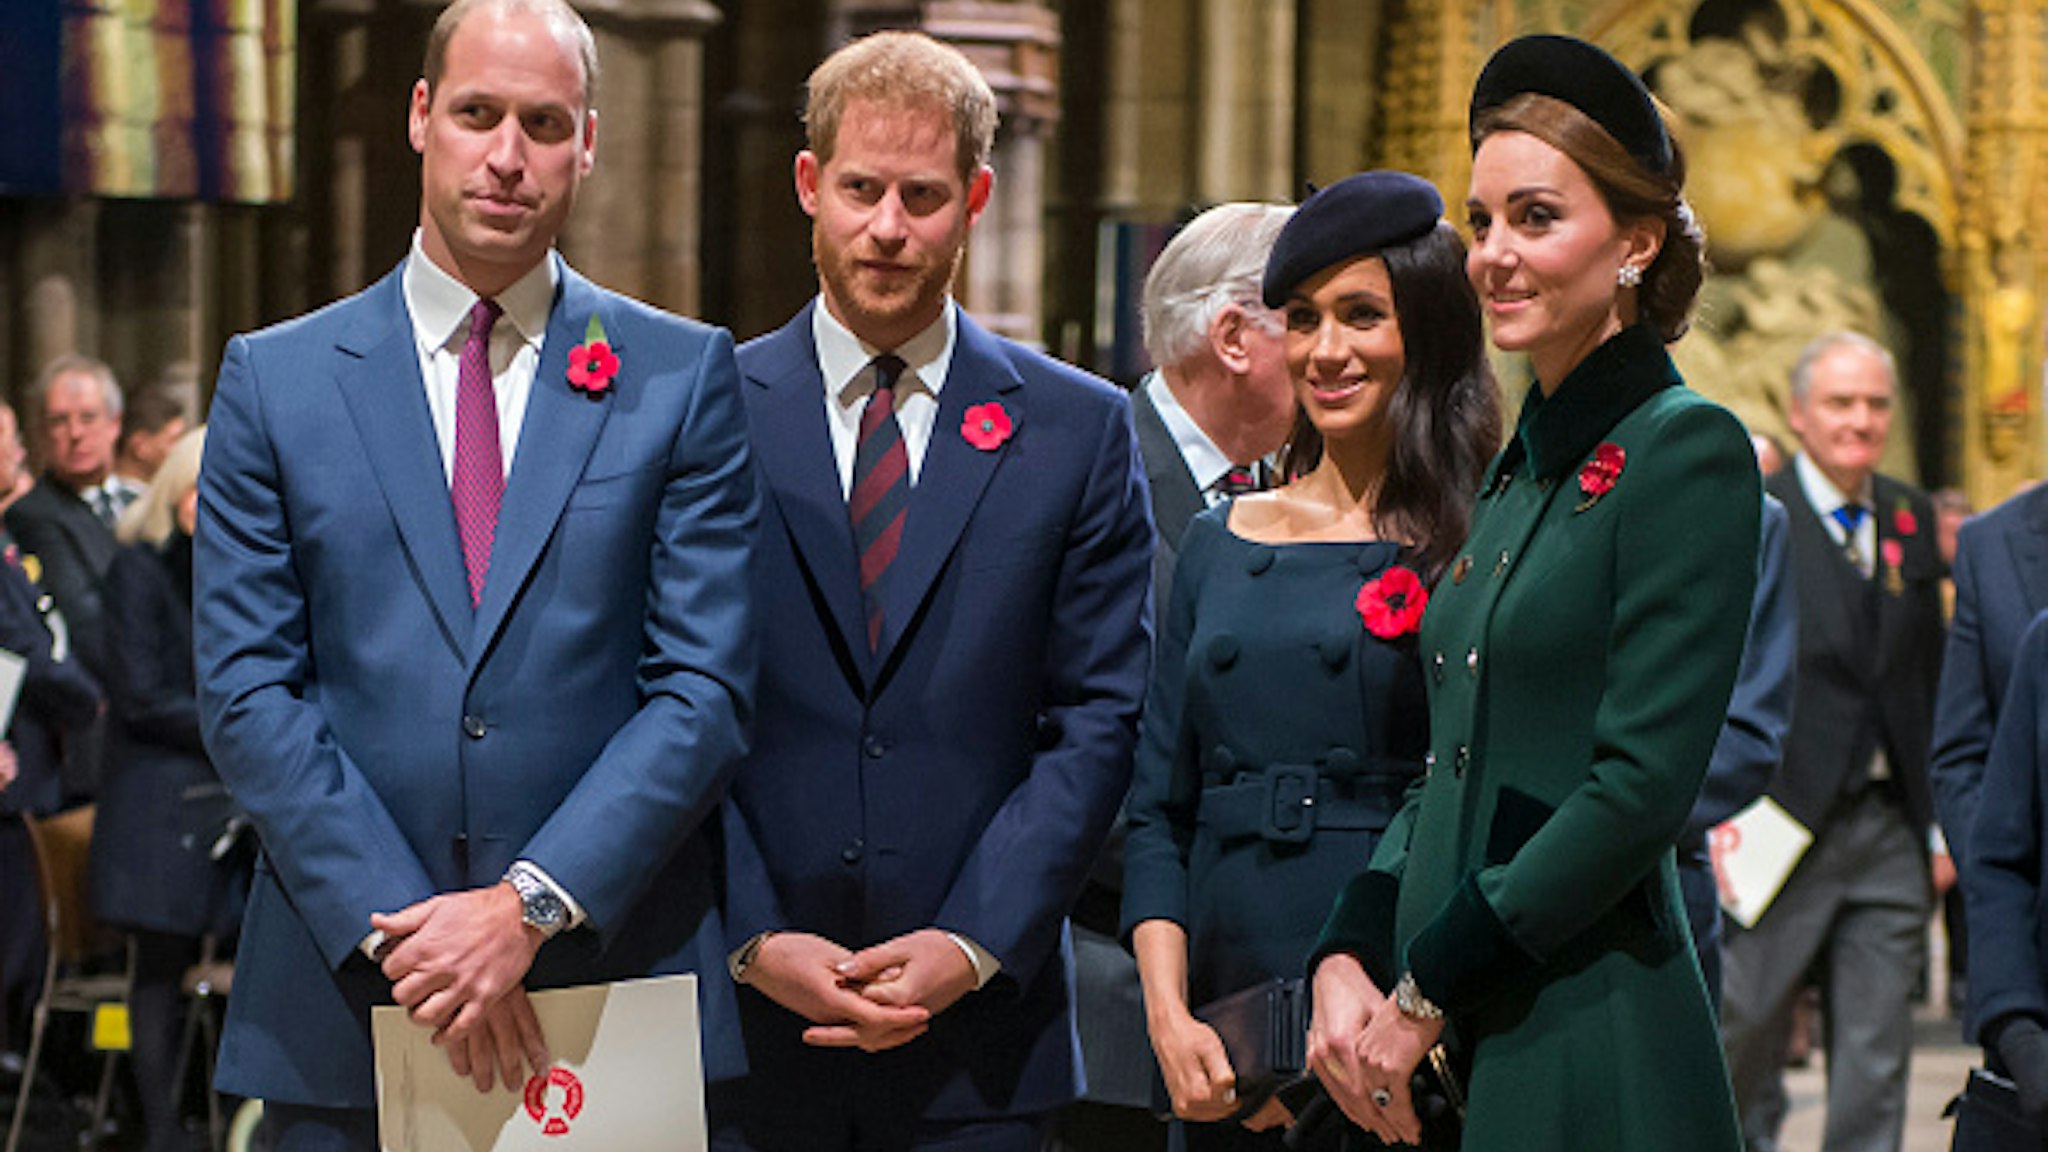 LONDON, ENGLAND - NOVEMBER 11: Prince William, Duke of Cambridge and Catherine, Duchess of Cambridge, Prince Harry, Duke of Sussex and Meghan, Duchess of Sussex attend a service marking the centenary of WW1 armistice at Westminster Abbey on November 11, 2018 in London, England. The armistice ending the First World War between the Allies and Germany was signed at Compiègne, France on eleventh hour of the eleventh day of the eleventh month - 11am on the 11th November 1918. This day is commemorated as Remembrance Day with special attention being paid for this years centenary.